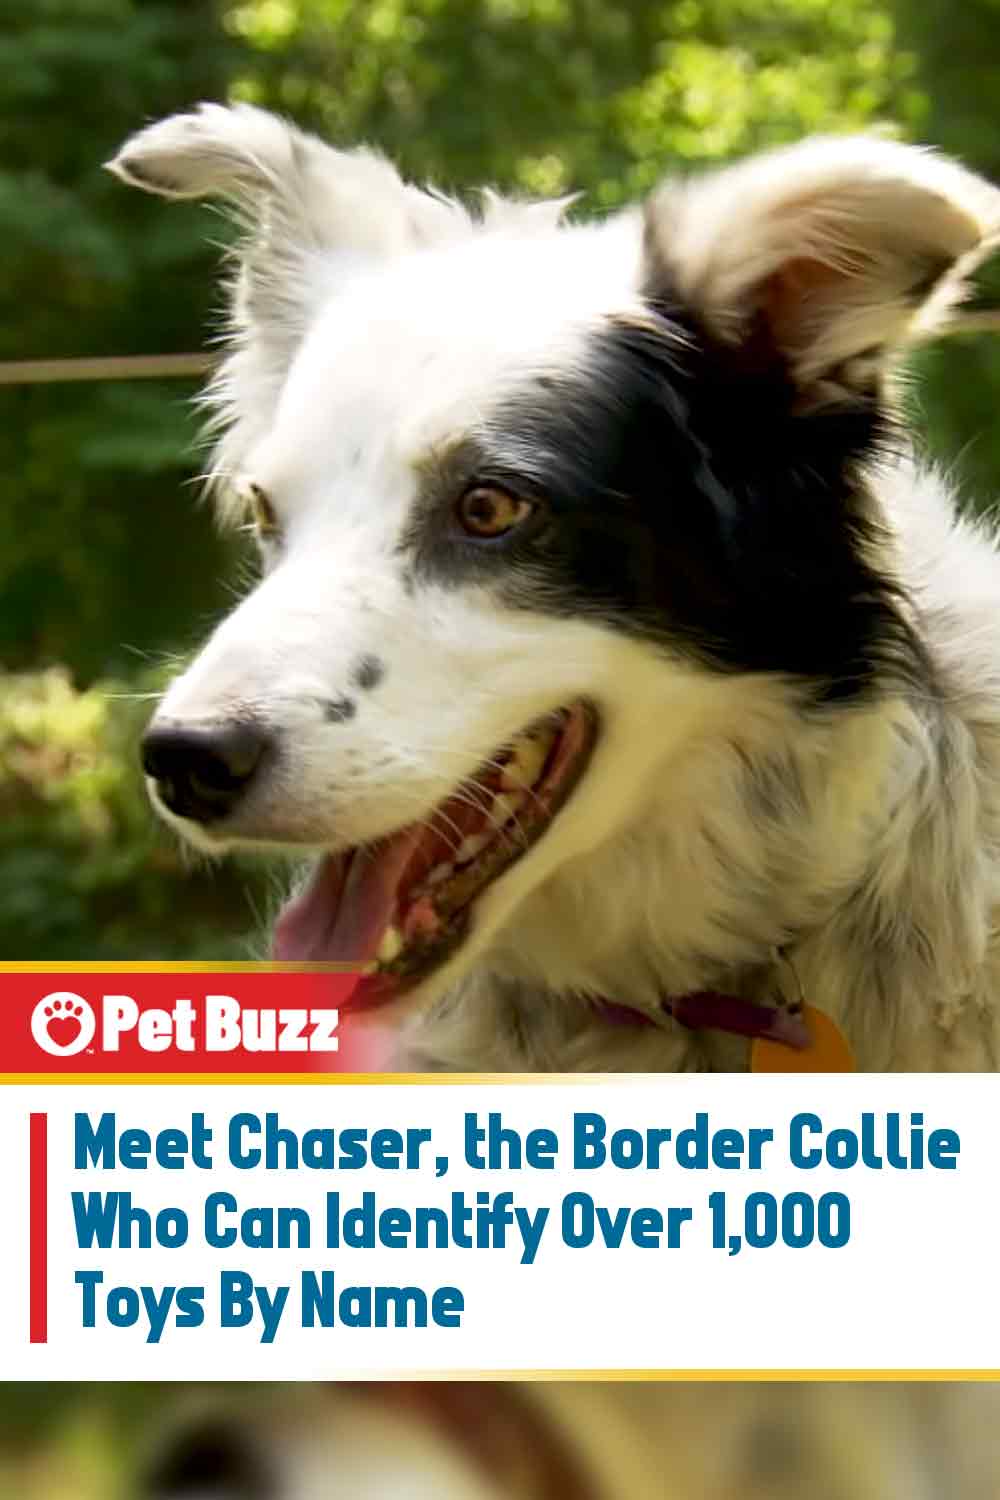 Meet Chaser, the Border Collie Who Can Identify Over 1,000 Toys By Name